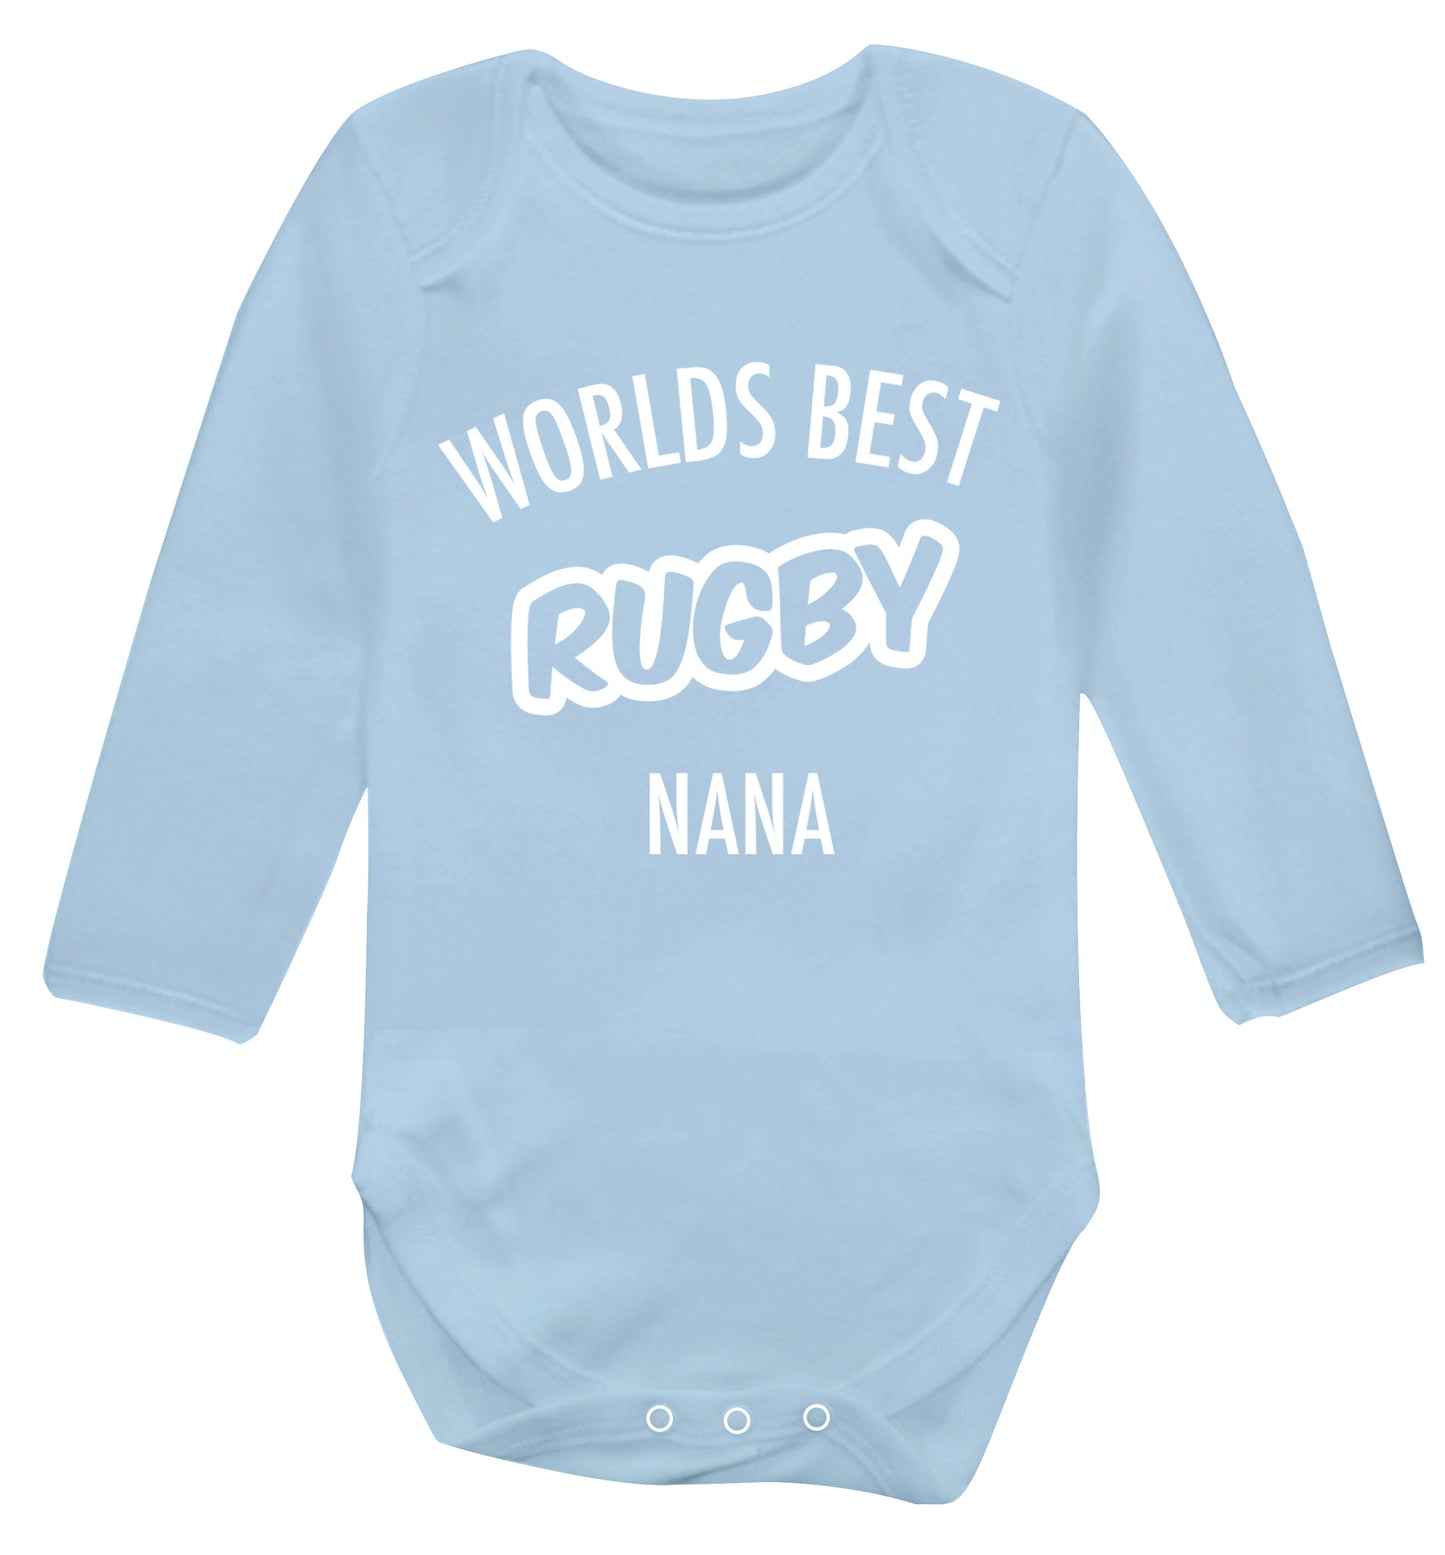 Worlds Best Rugby Grandma Baby Vest long sleeved pale blue 6-12 months